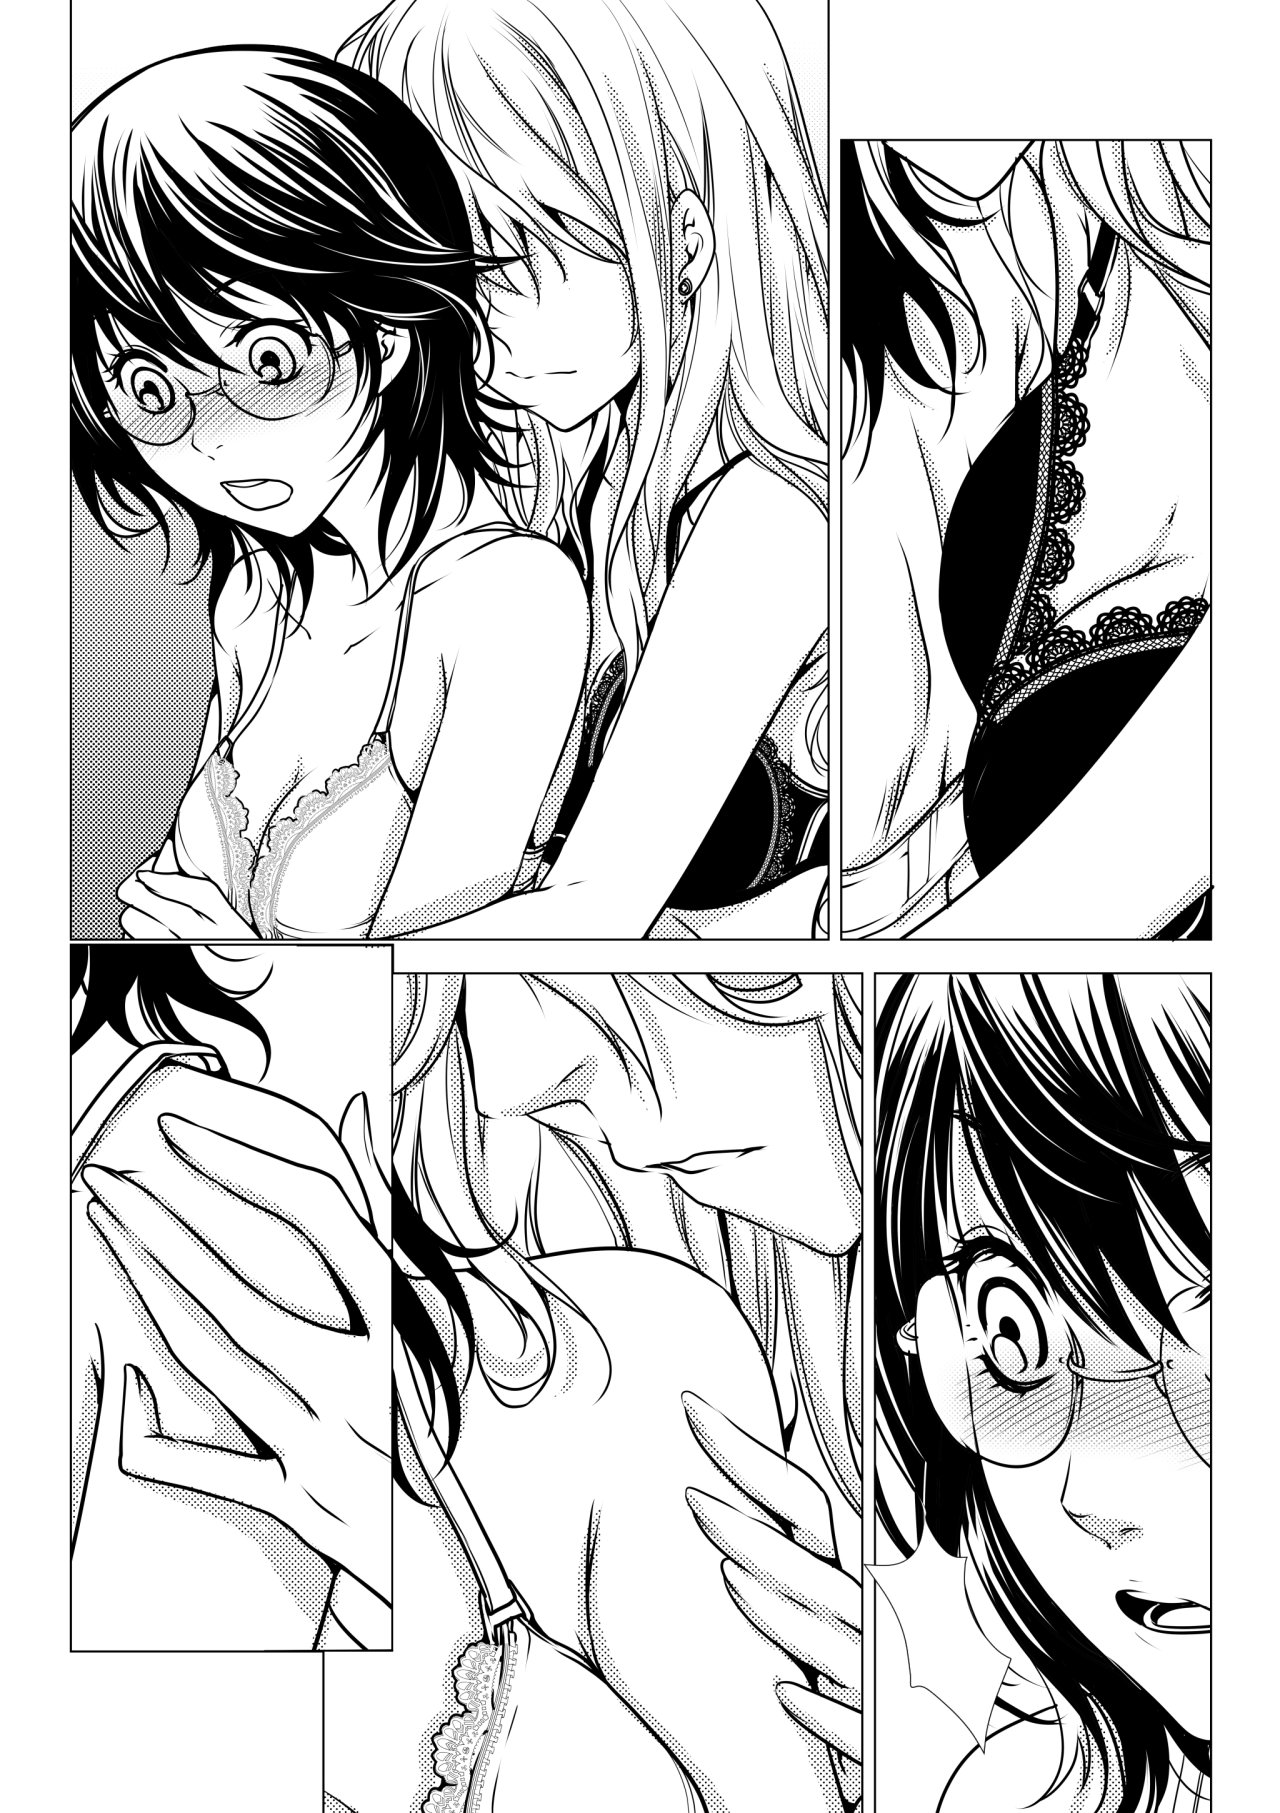 Lily Love Chapter 9 - RAWS are here :D (log in via FB to see or create account on